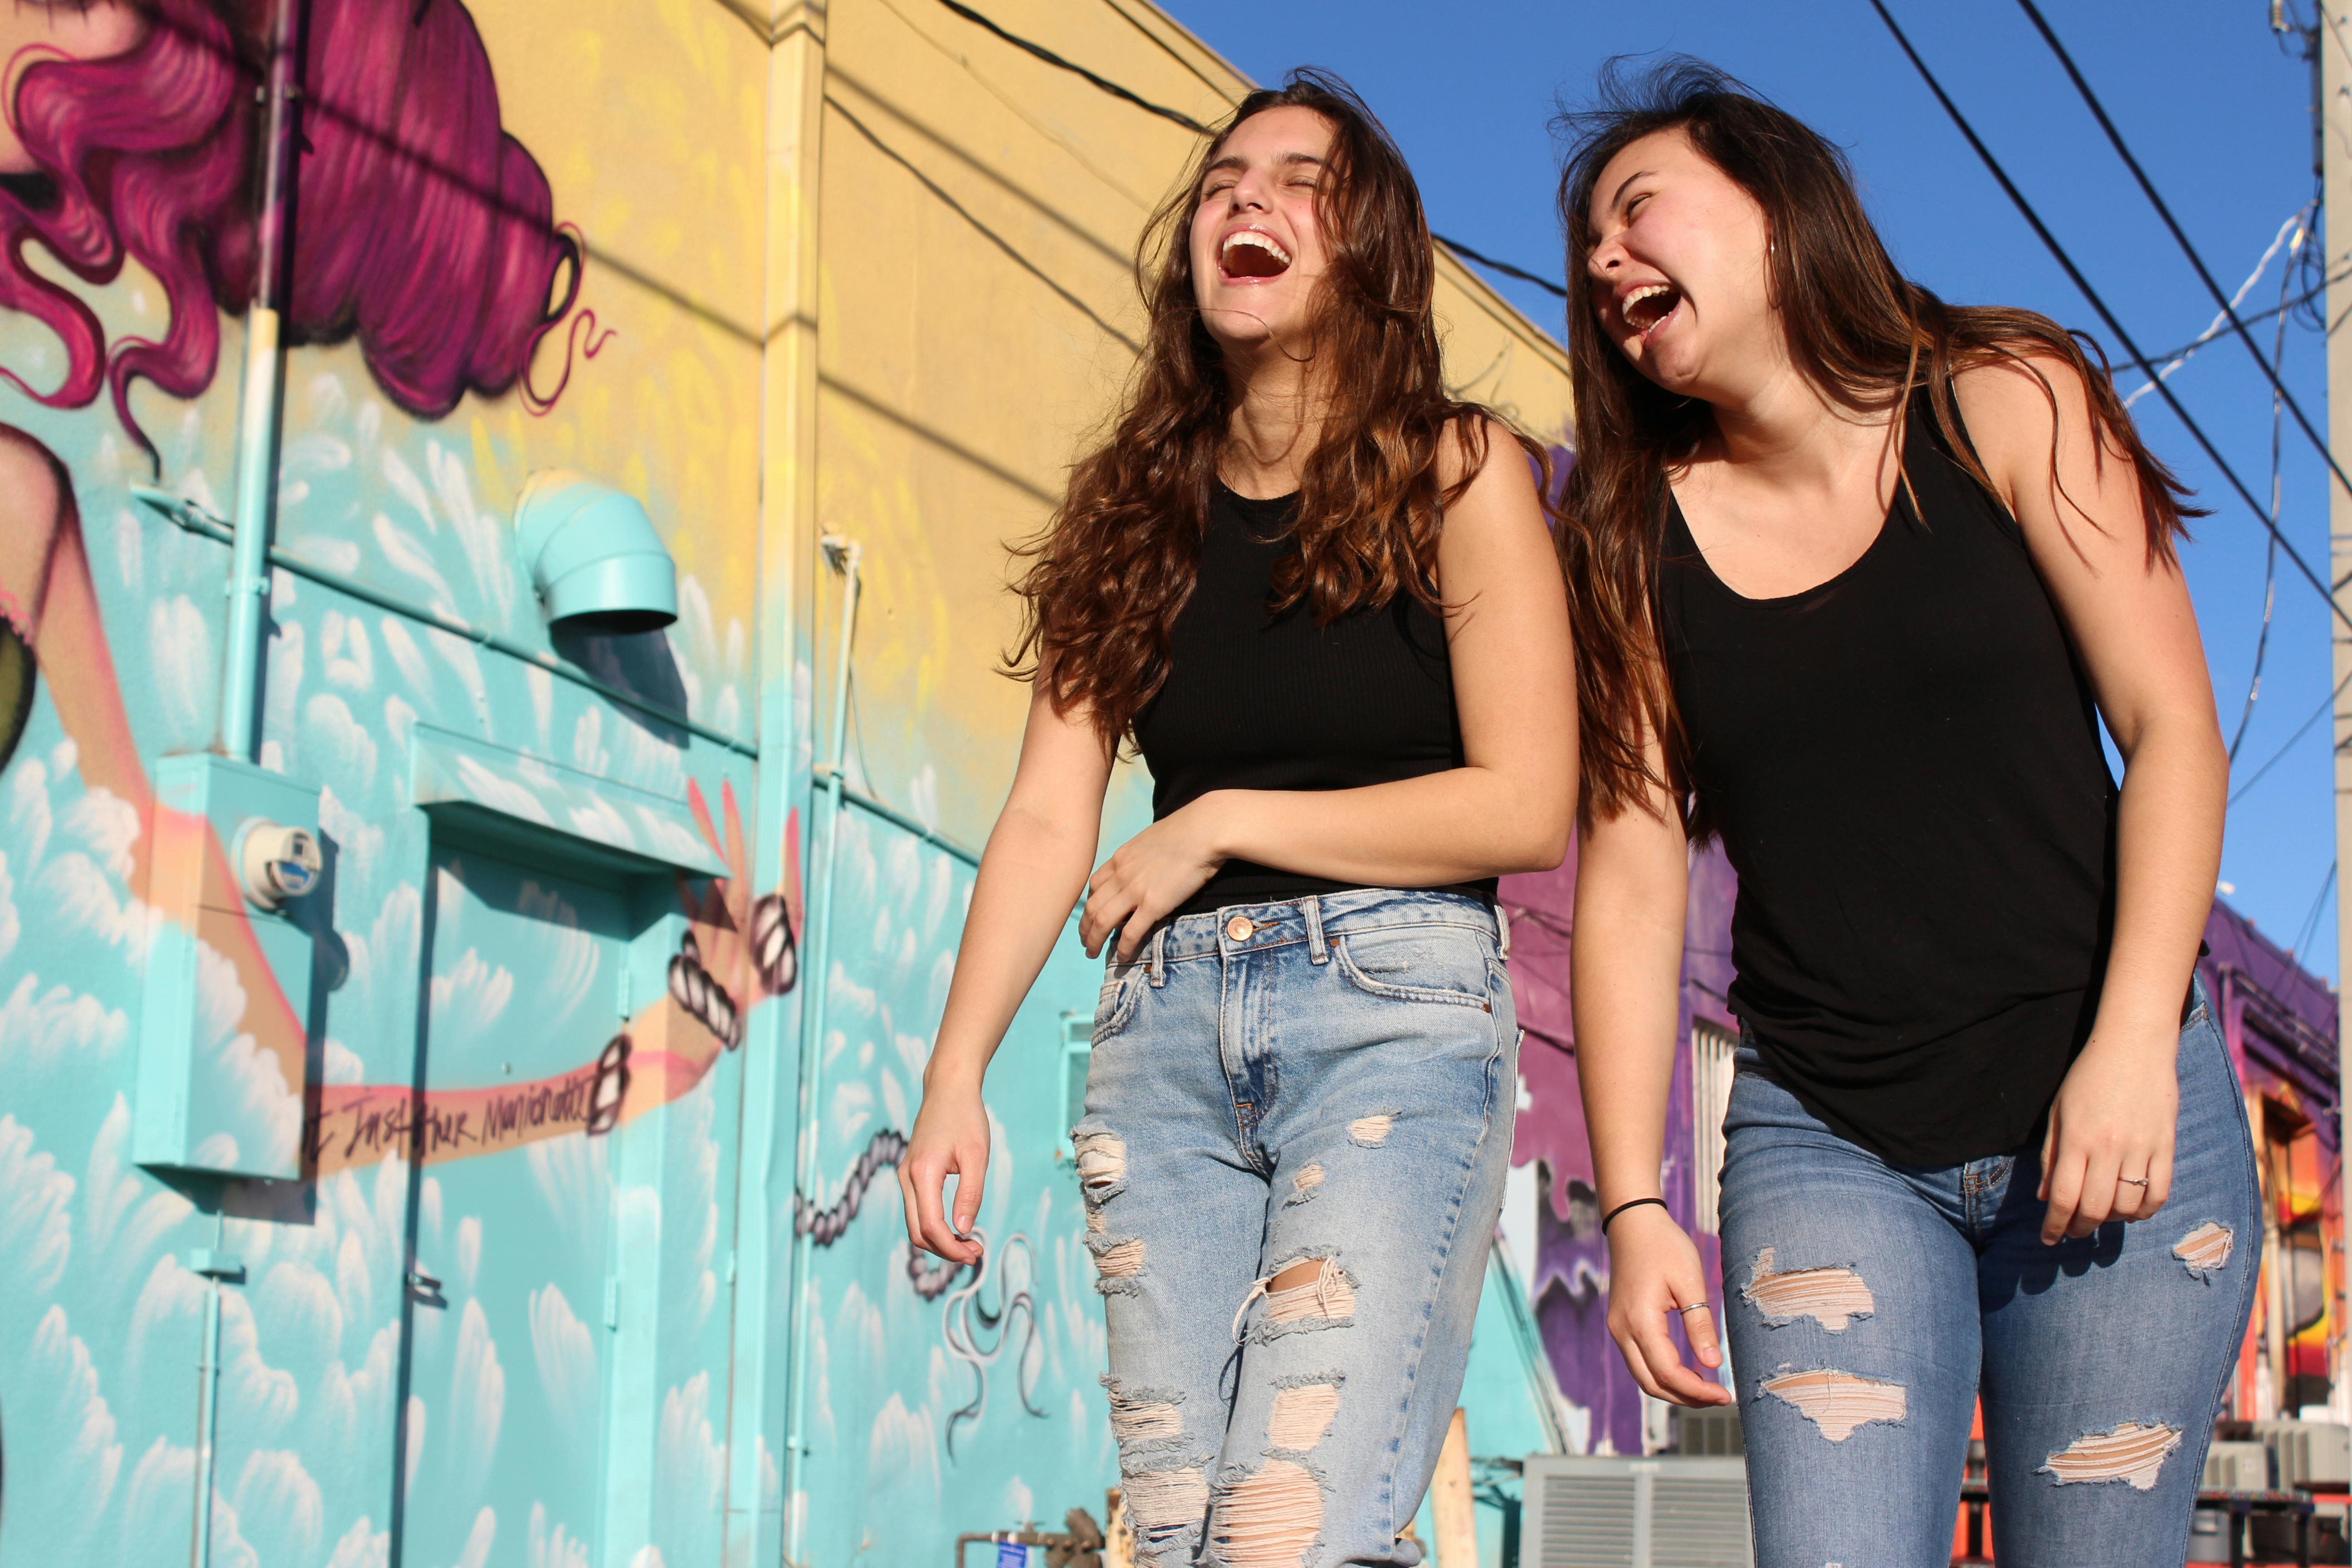 Two young women walking and laughing | Source: Savannah Dematteo on Pexels